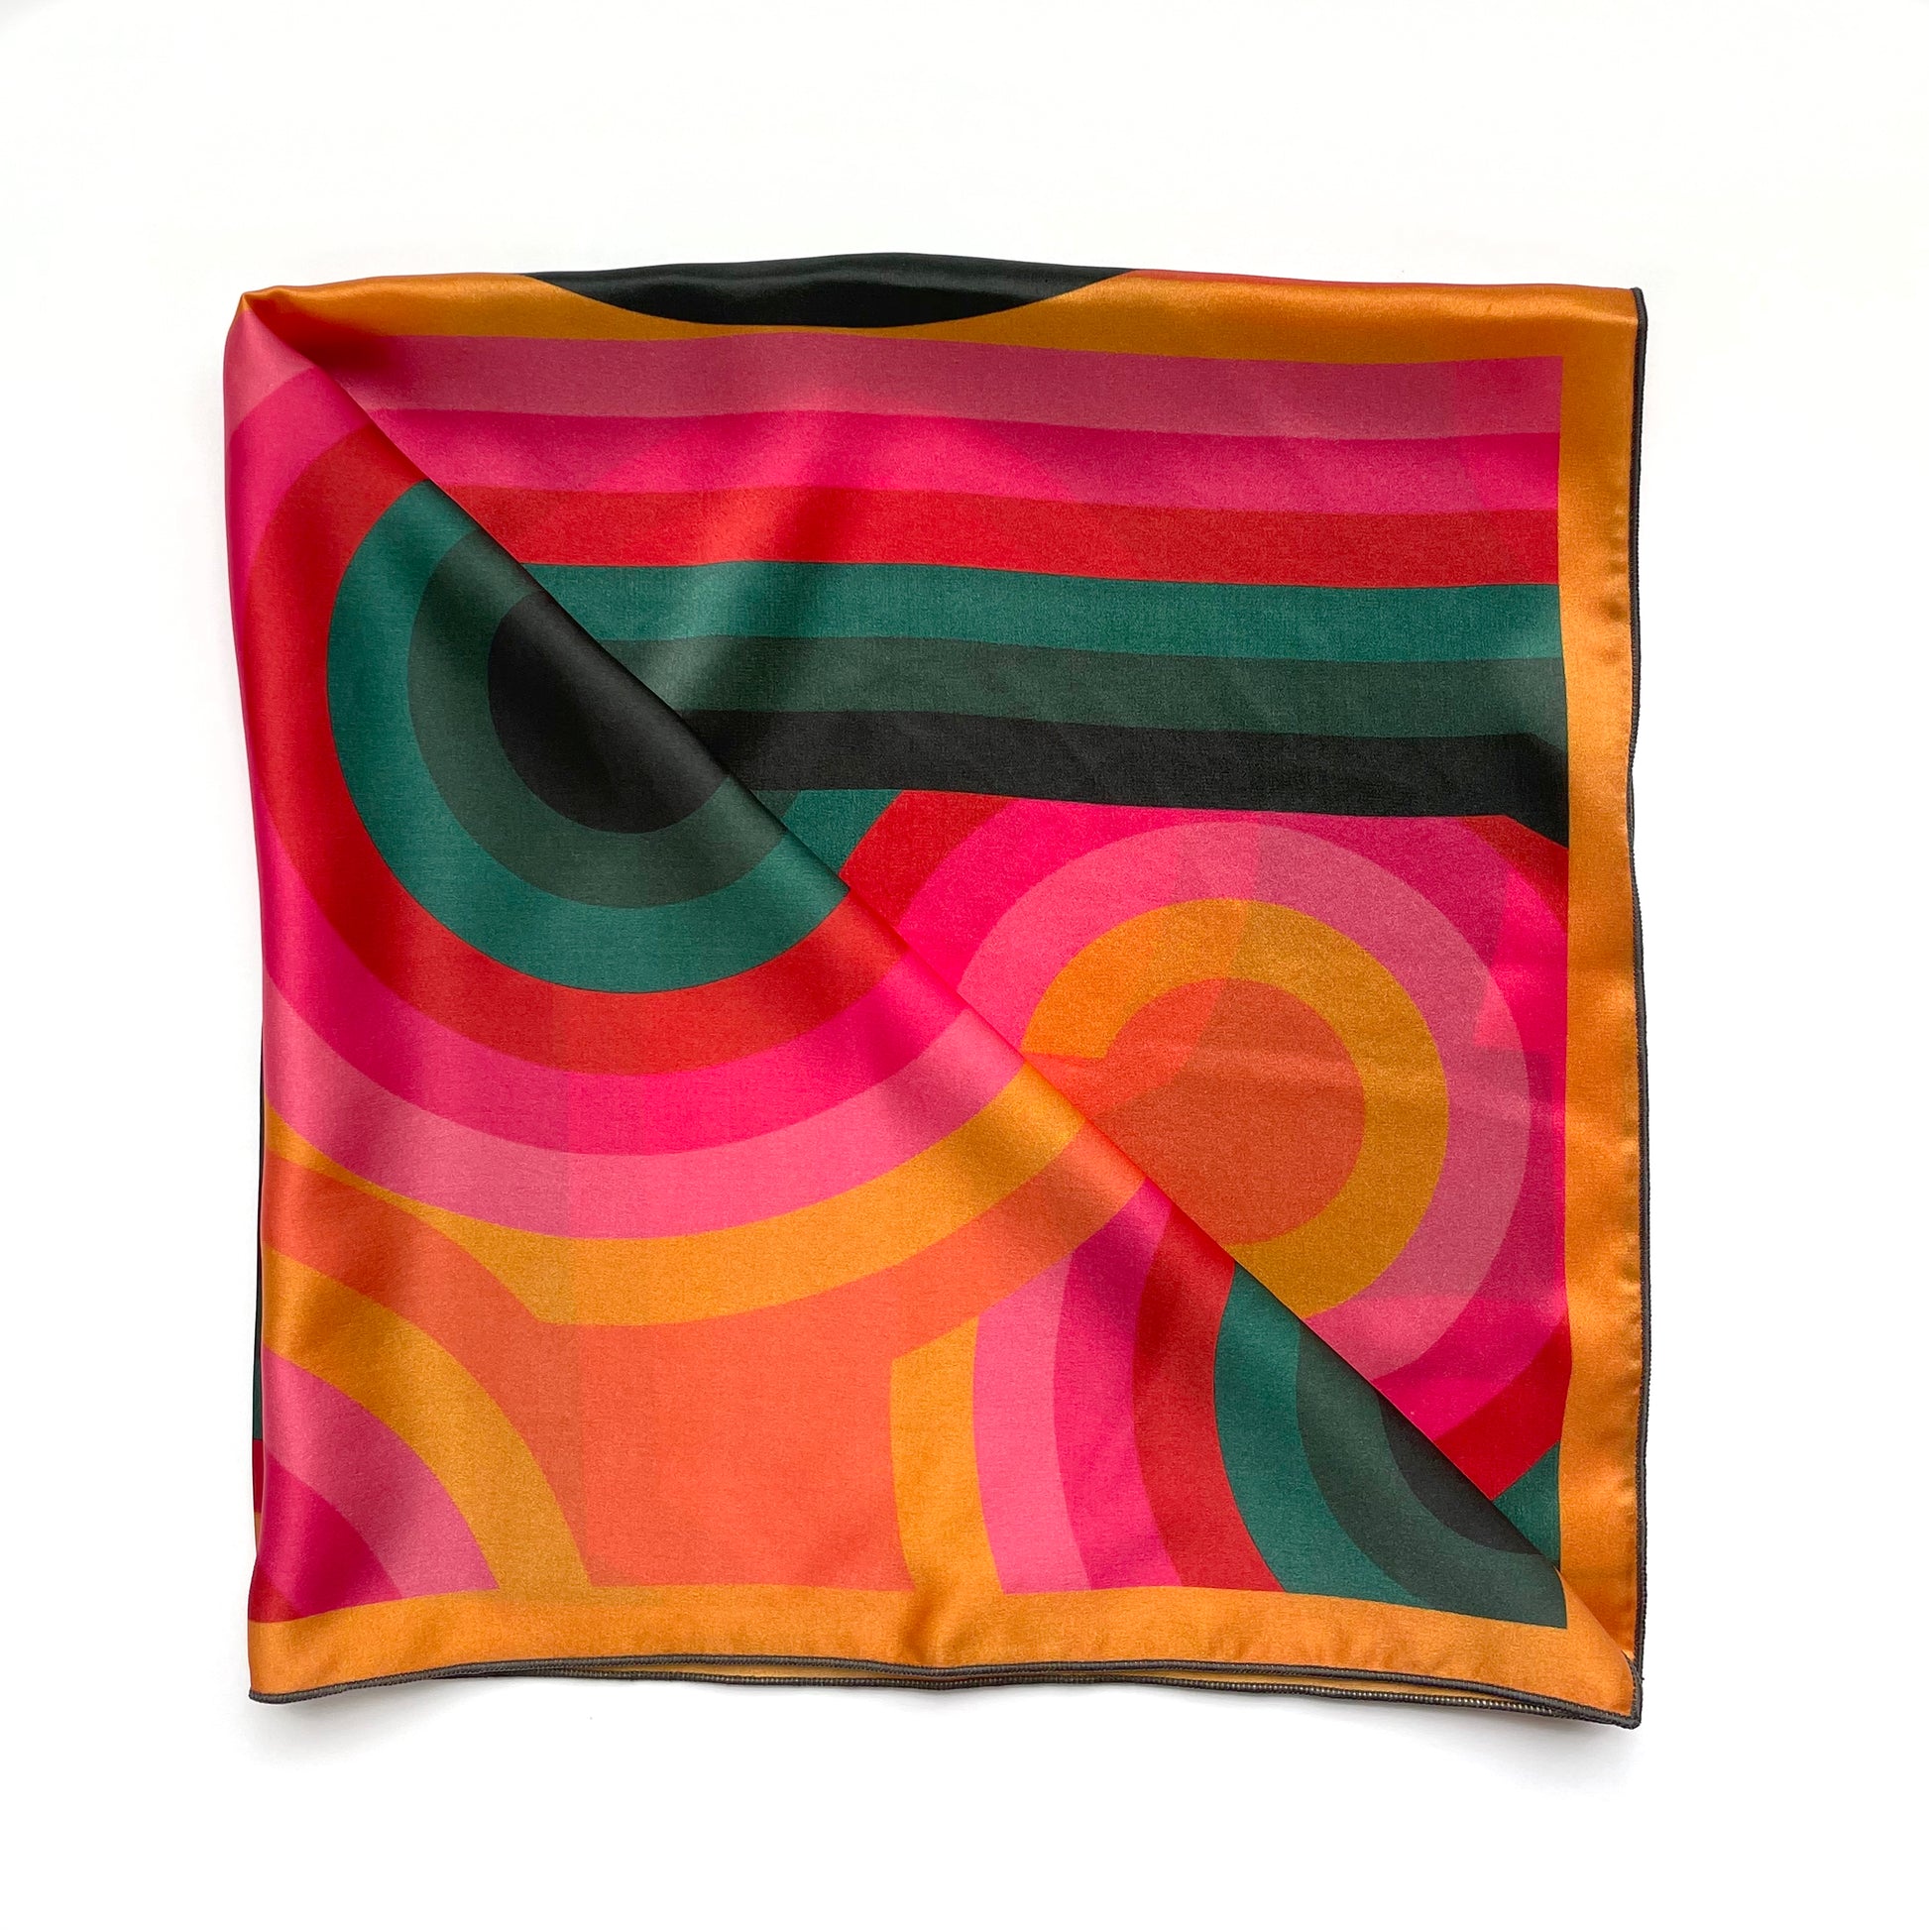 Our bestselling square silk scarf, the Lolly has a retro geometric print and colorful design that is beautiful as a head scarf, neck scarf, or tied to your purse